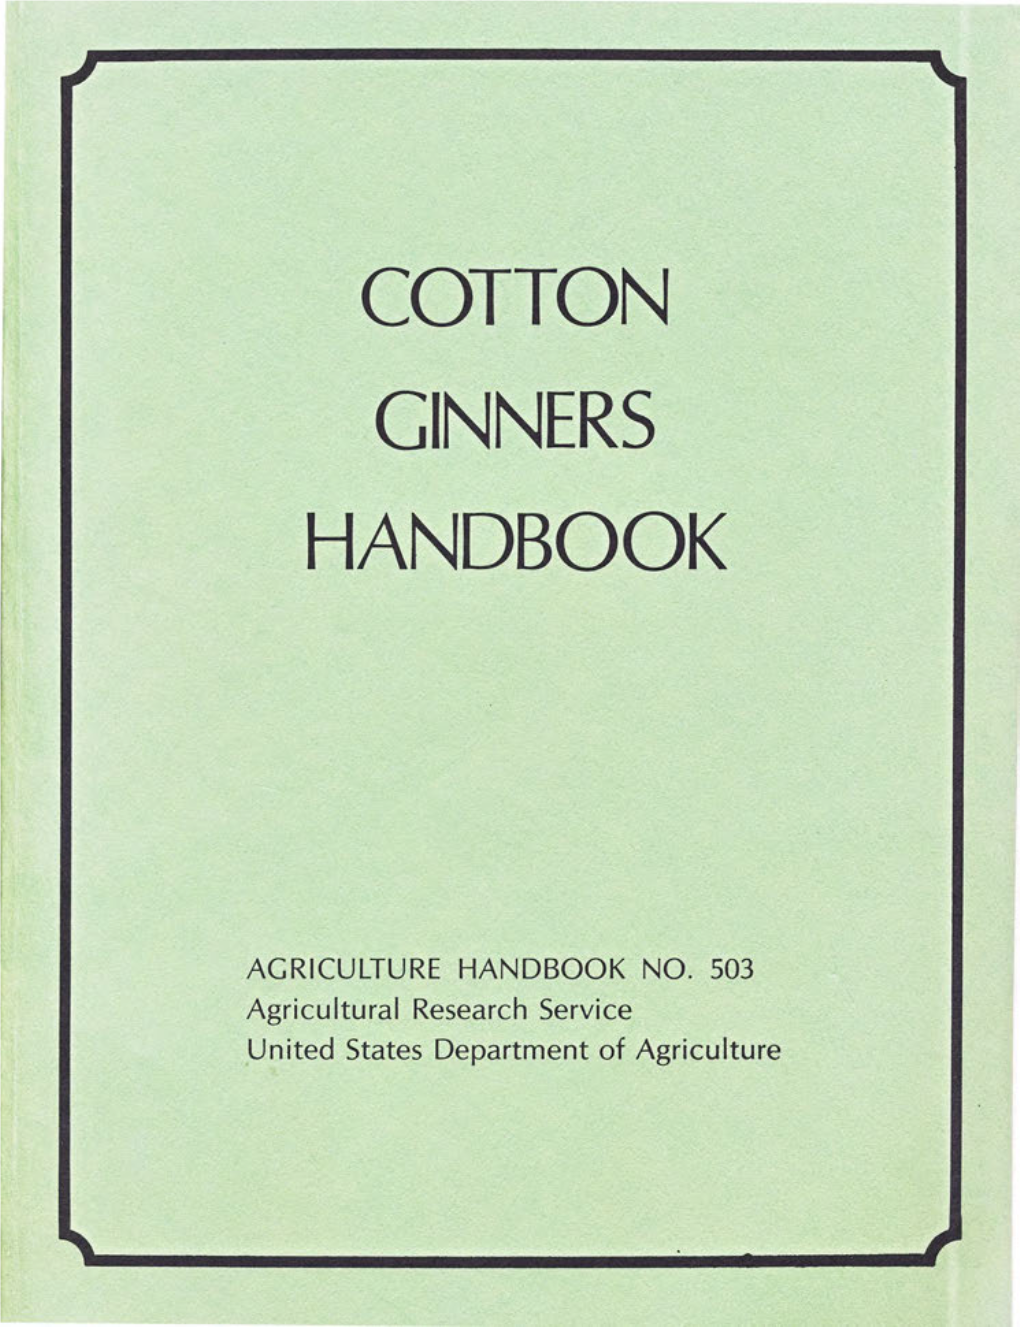 Cotton Ginners